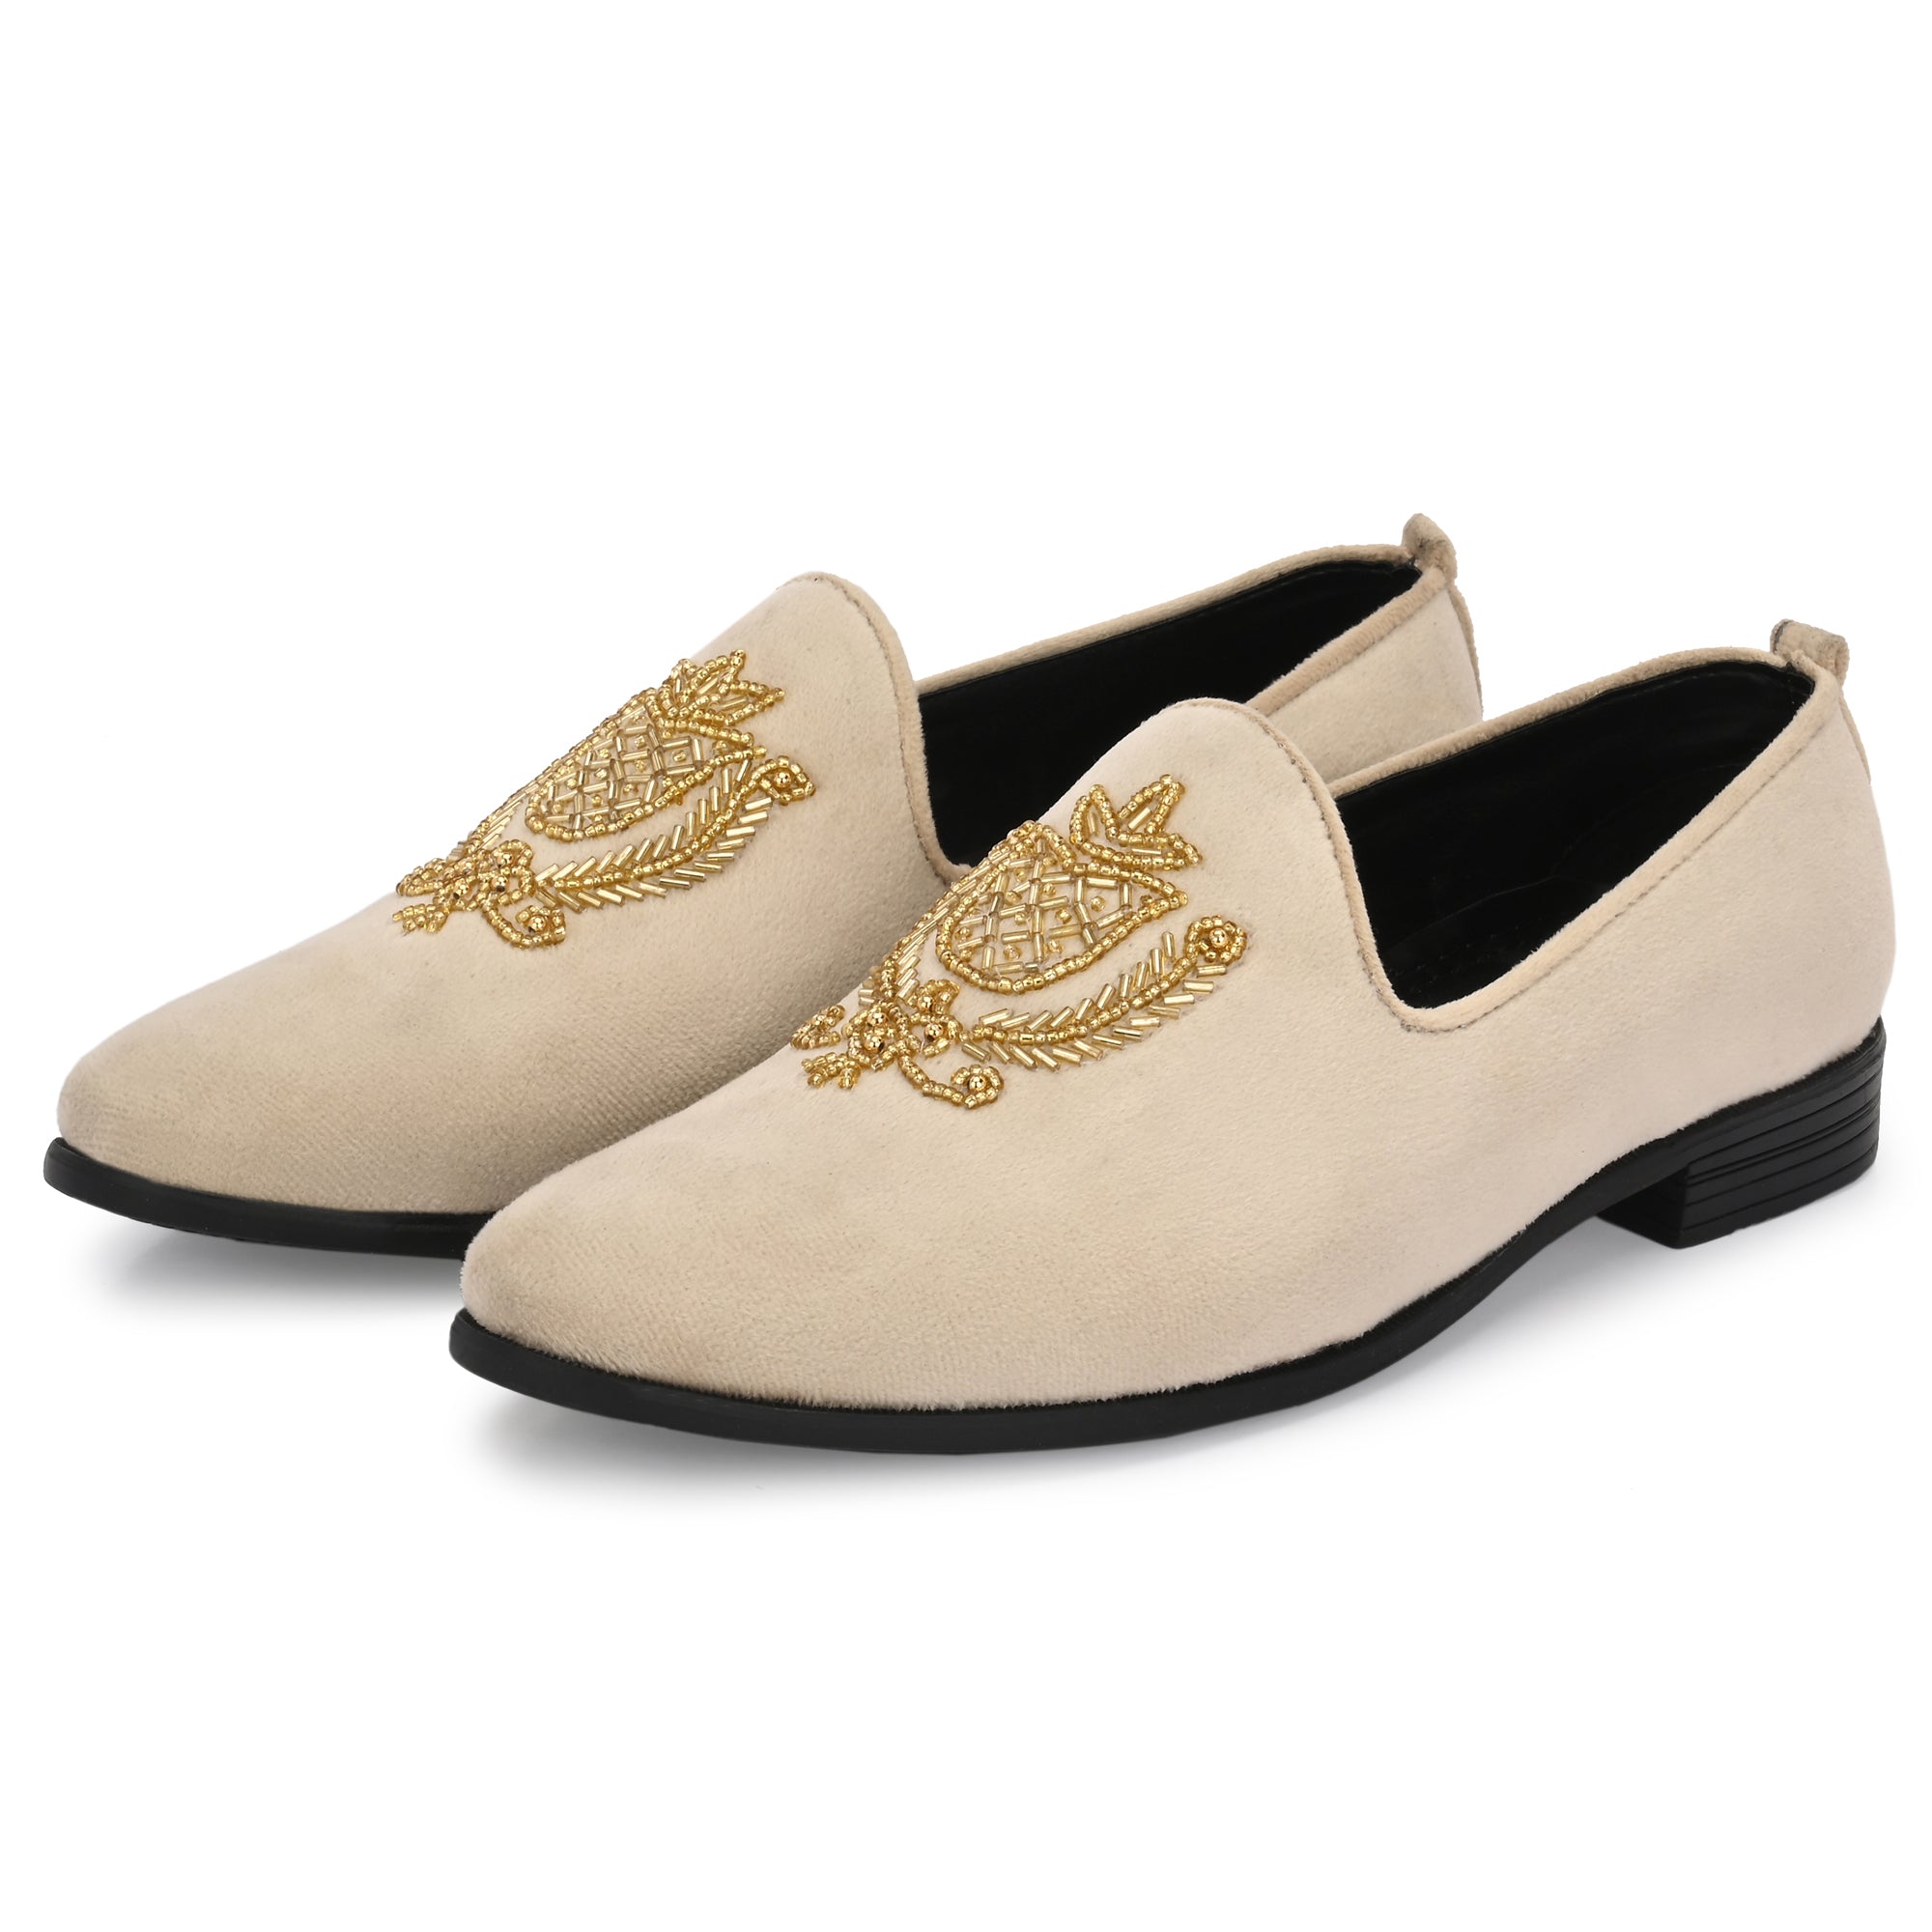 ELEGANCE EMBROIDERED SLIP-ONS SHOES